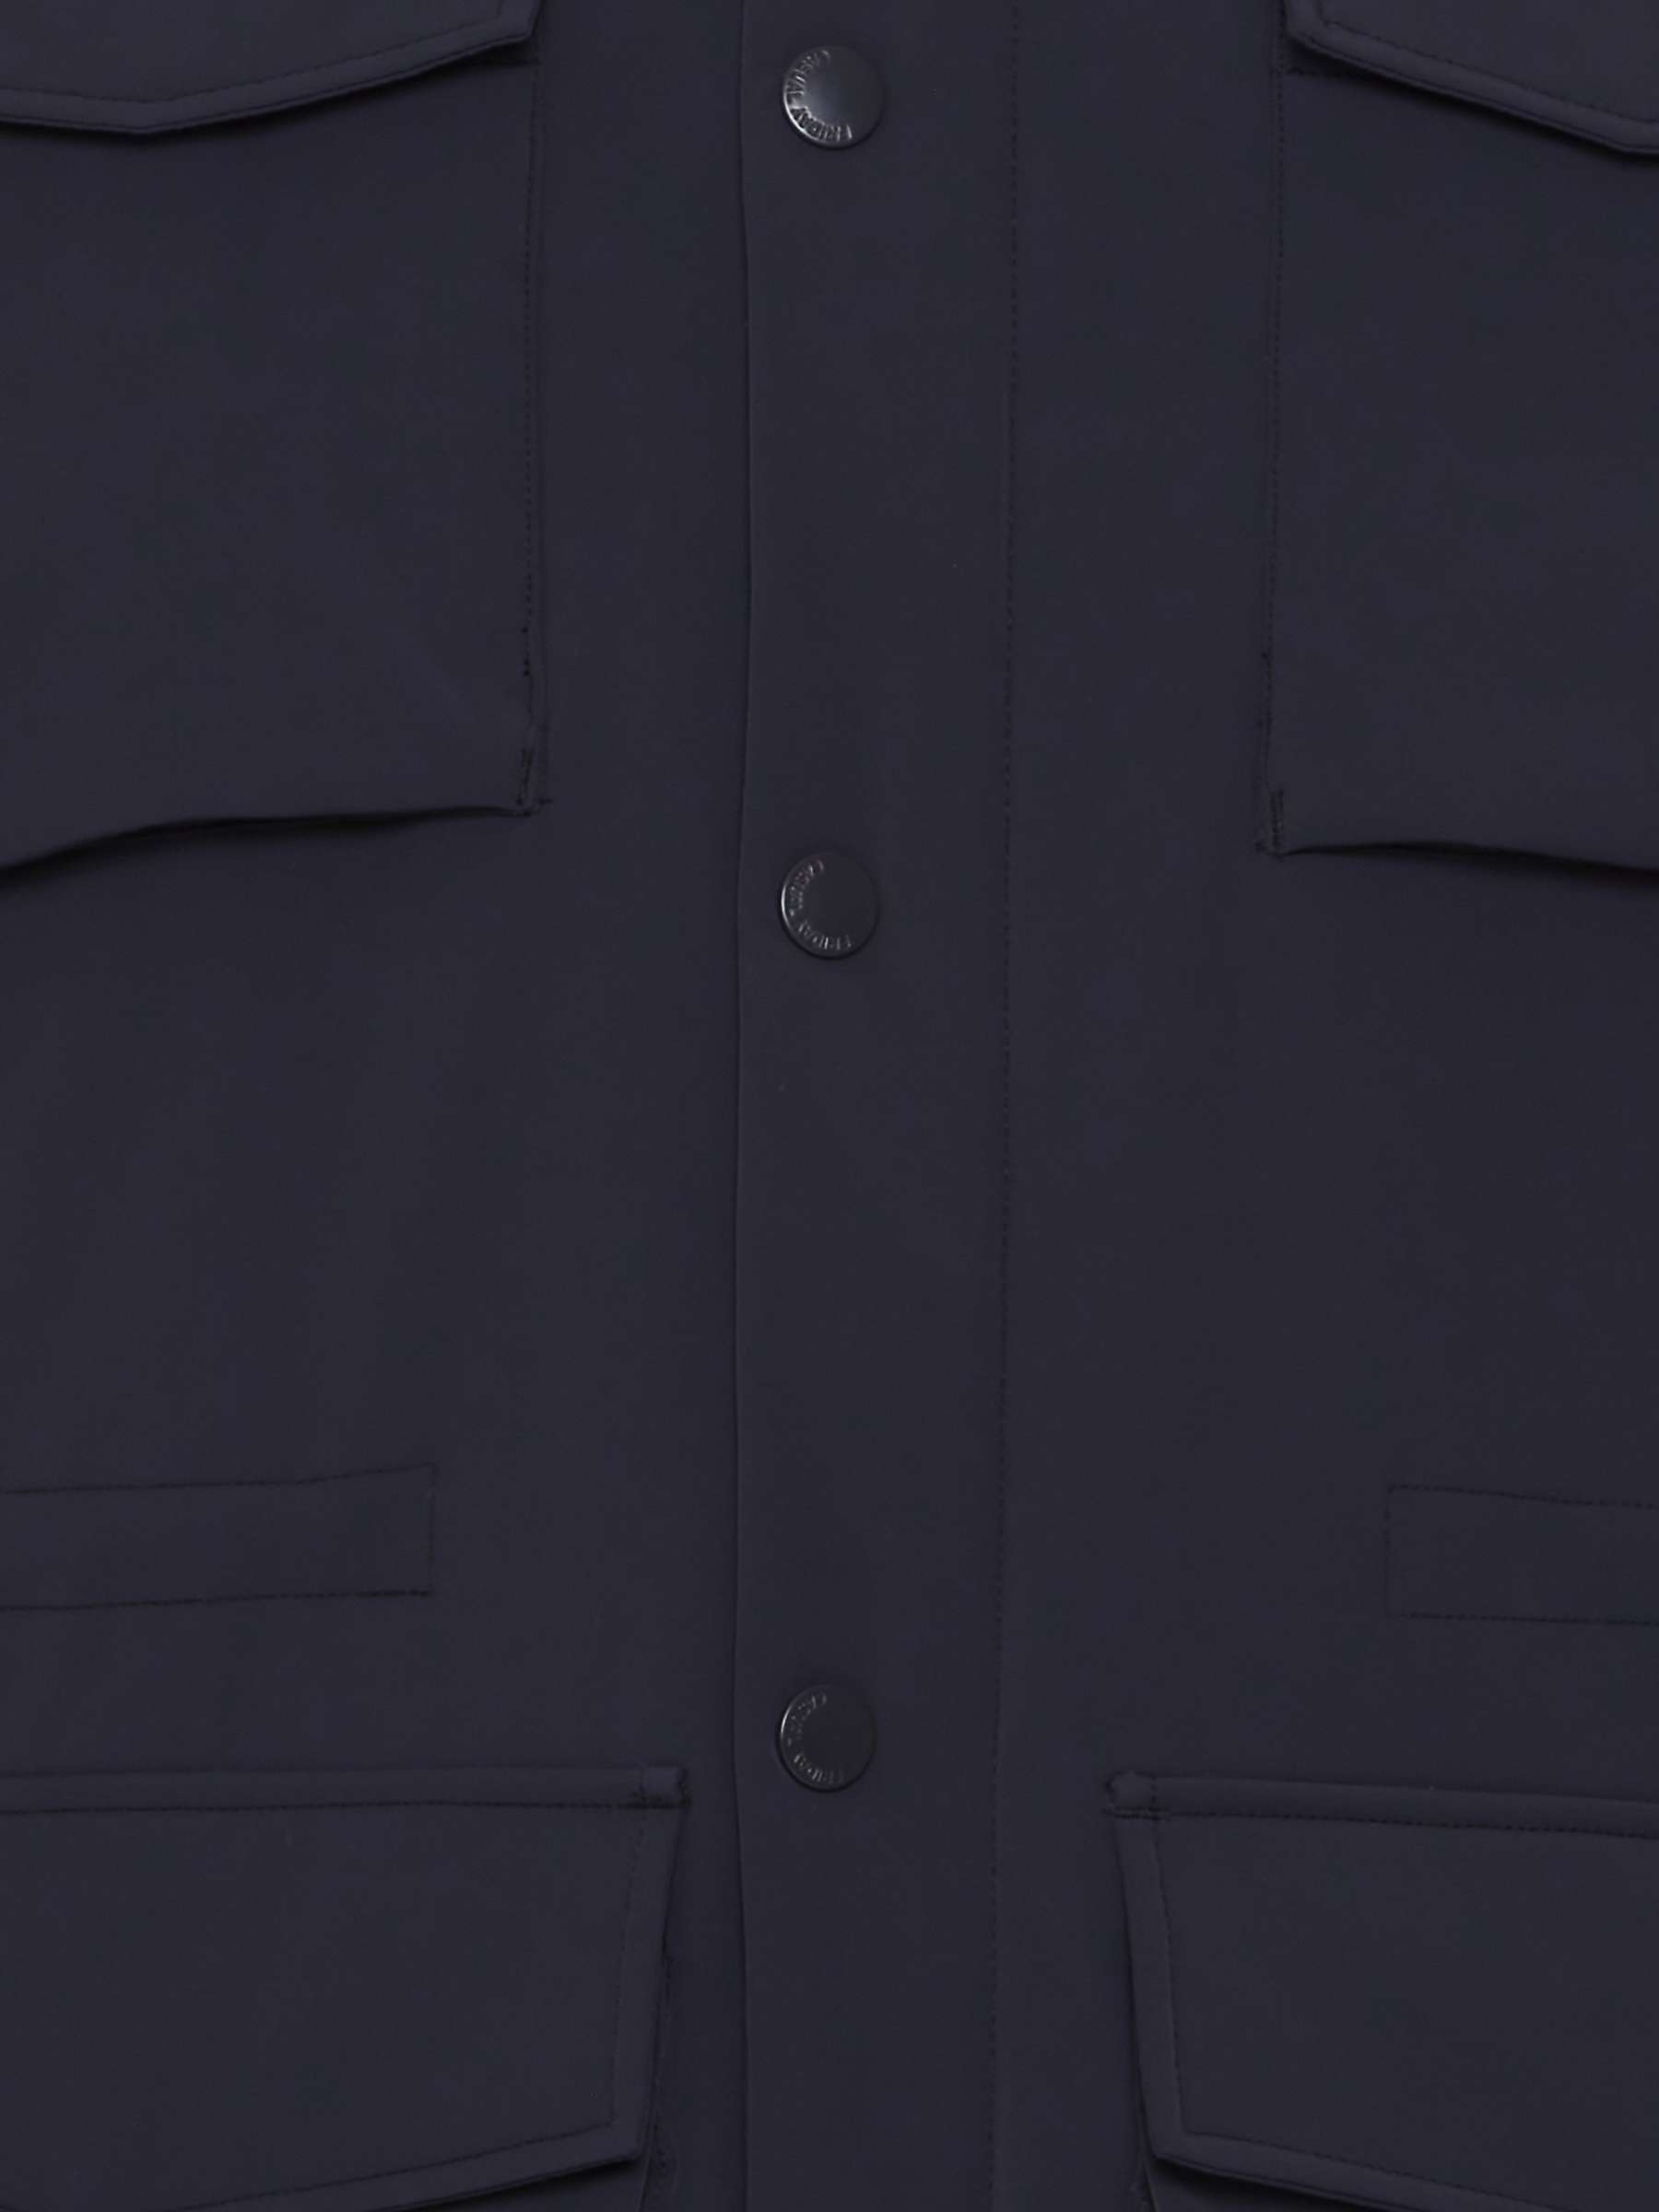 Buy Casual Friday Ortiz M65 Utility Jacket, Navy Online at johnlewis.com